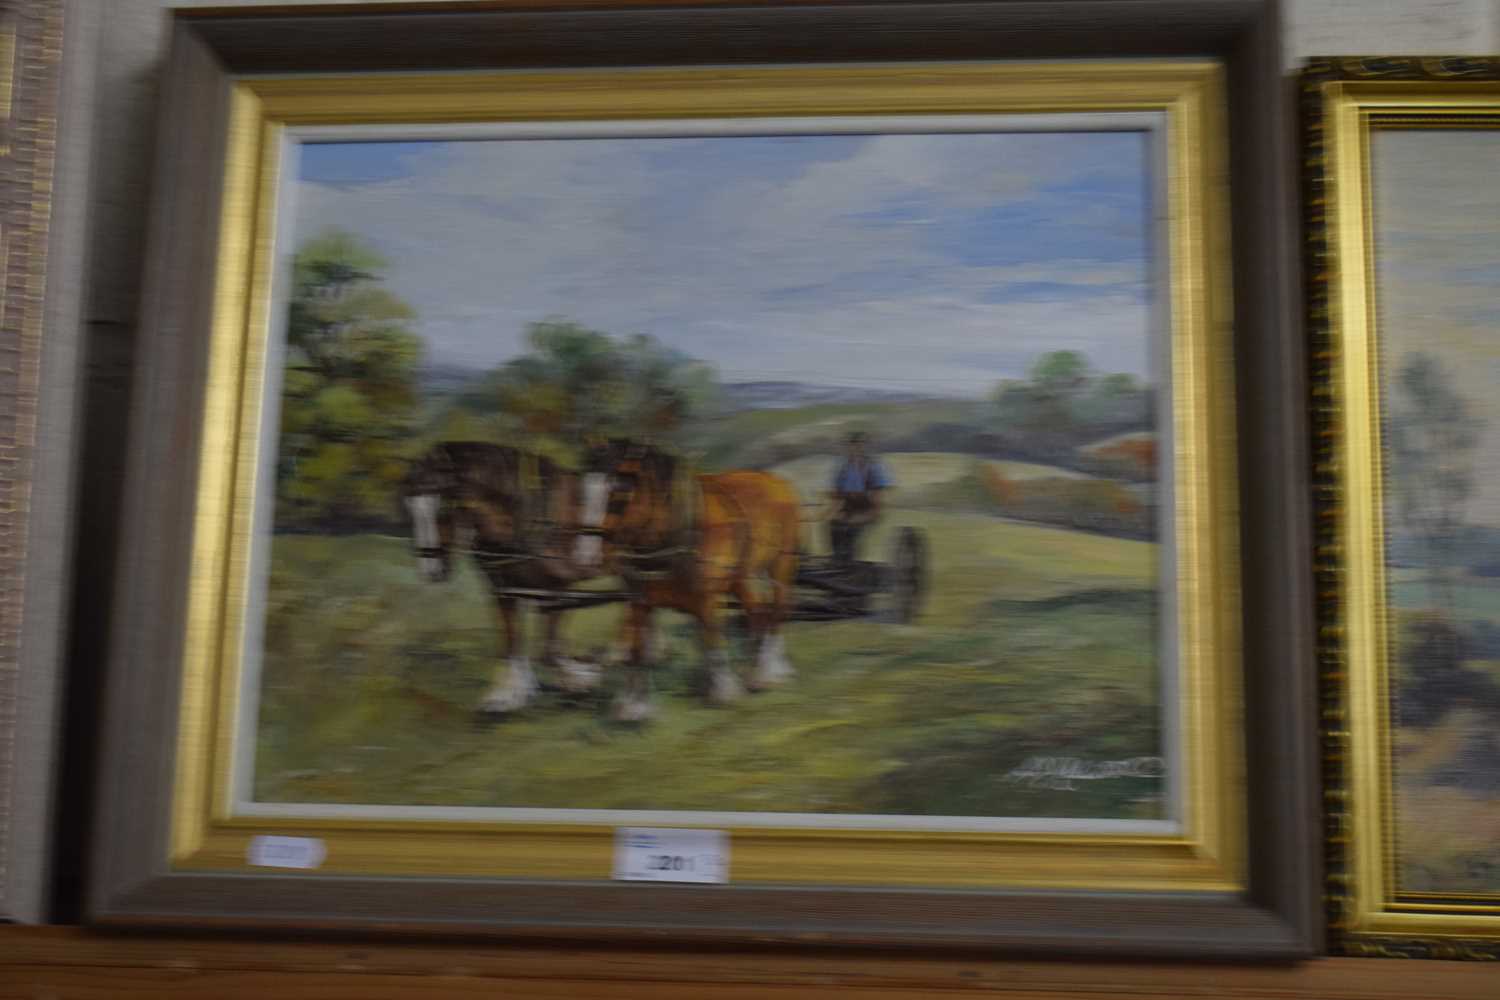 S J NEWSOME, STUDY OF PAIR OF HEAVY HORSES, OIL ON BOARD, TOGETHER WITH A FURTHER STUDY OF A HARVEST